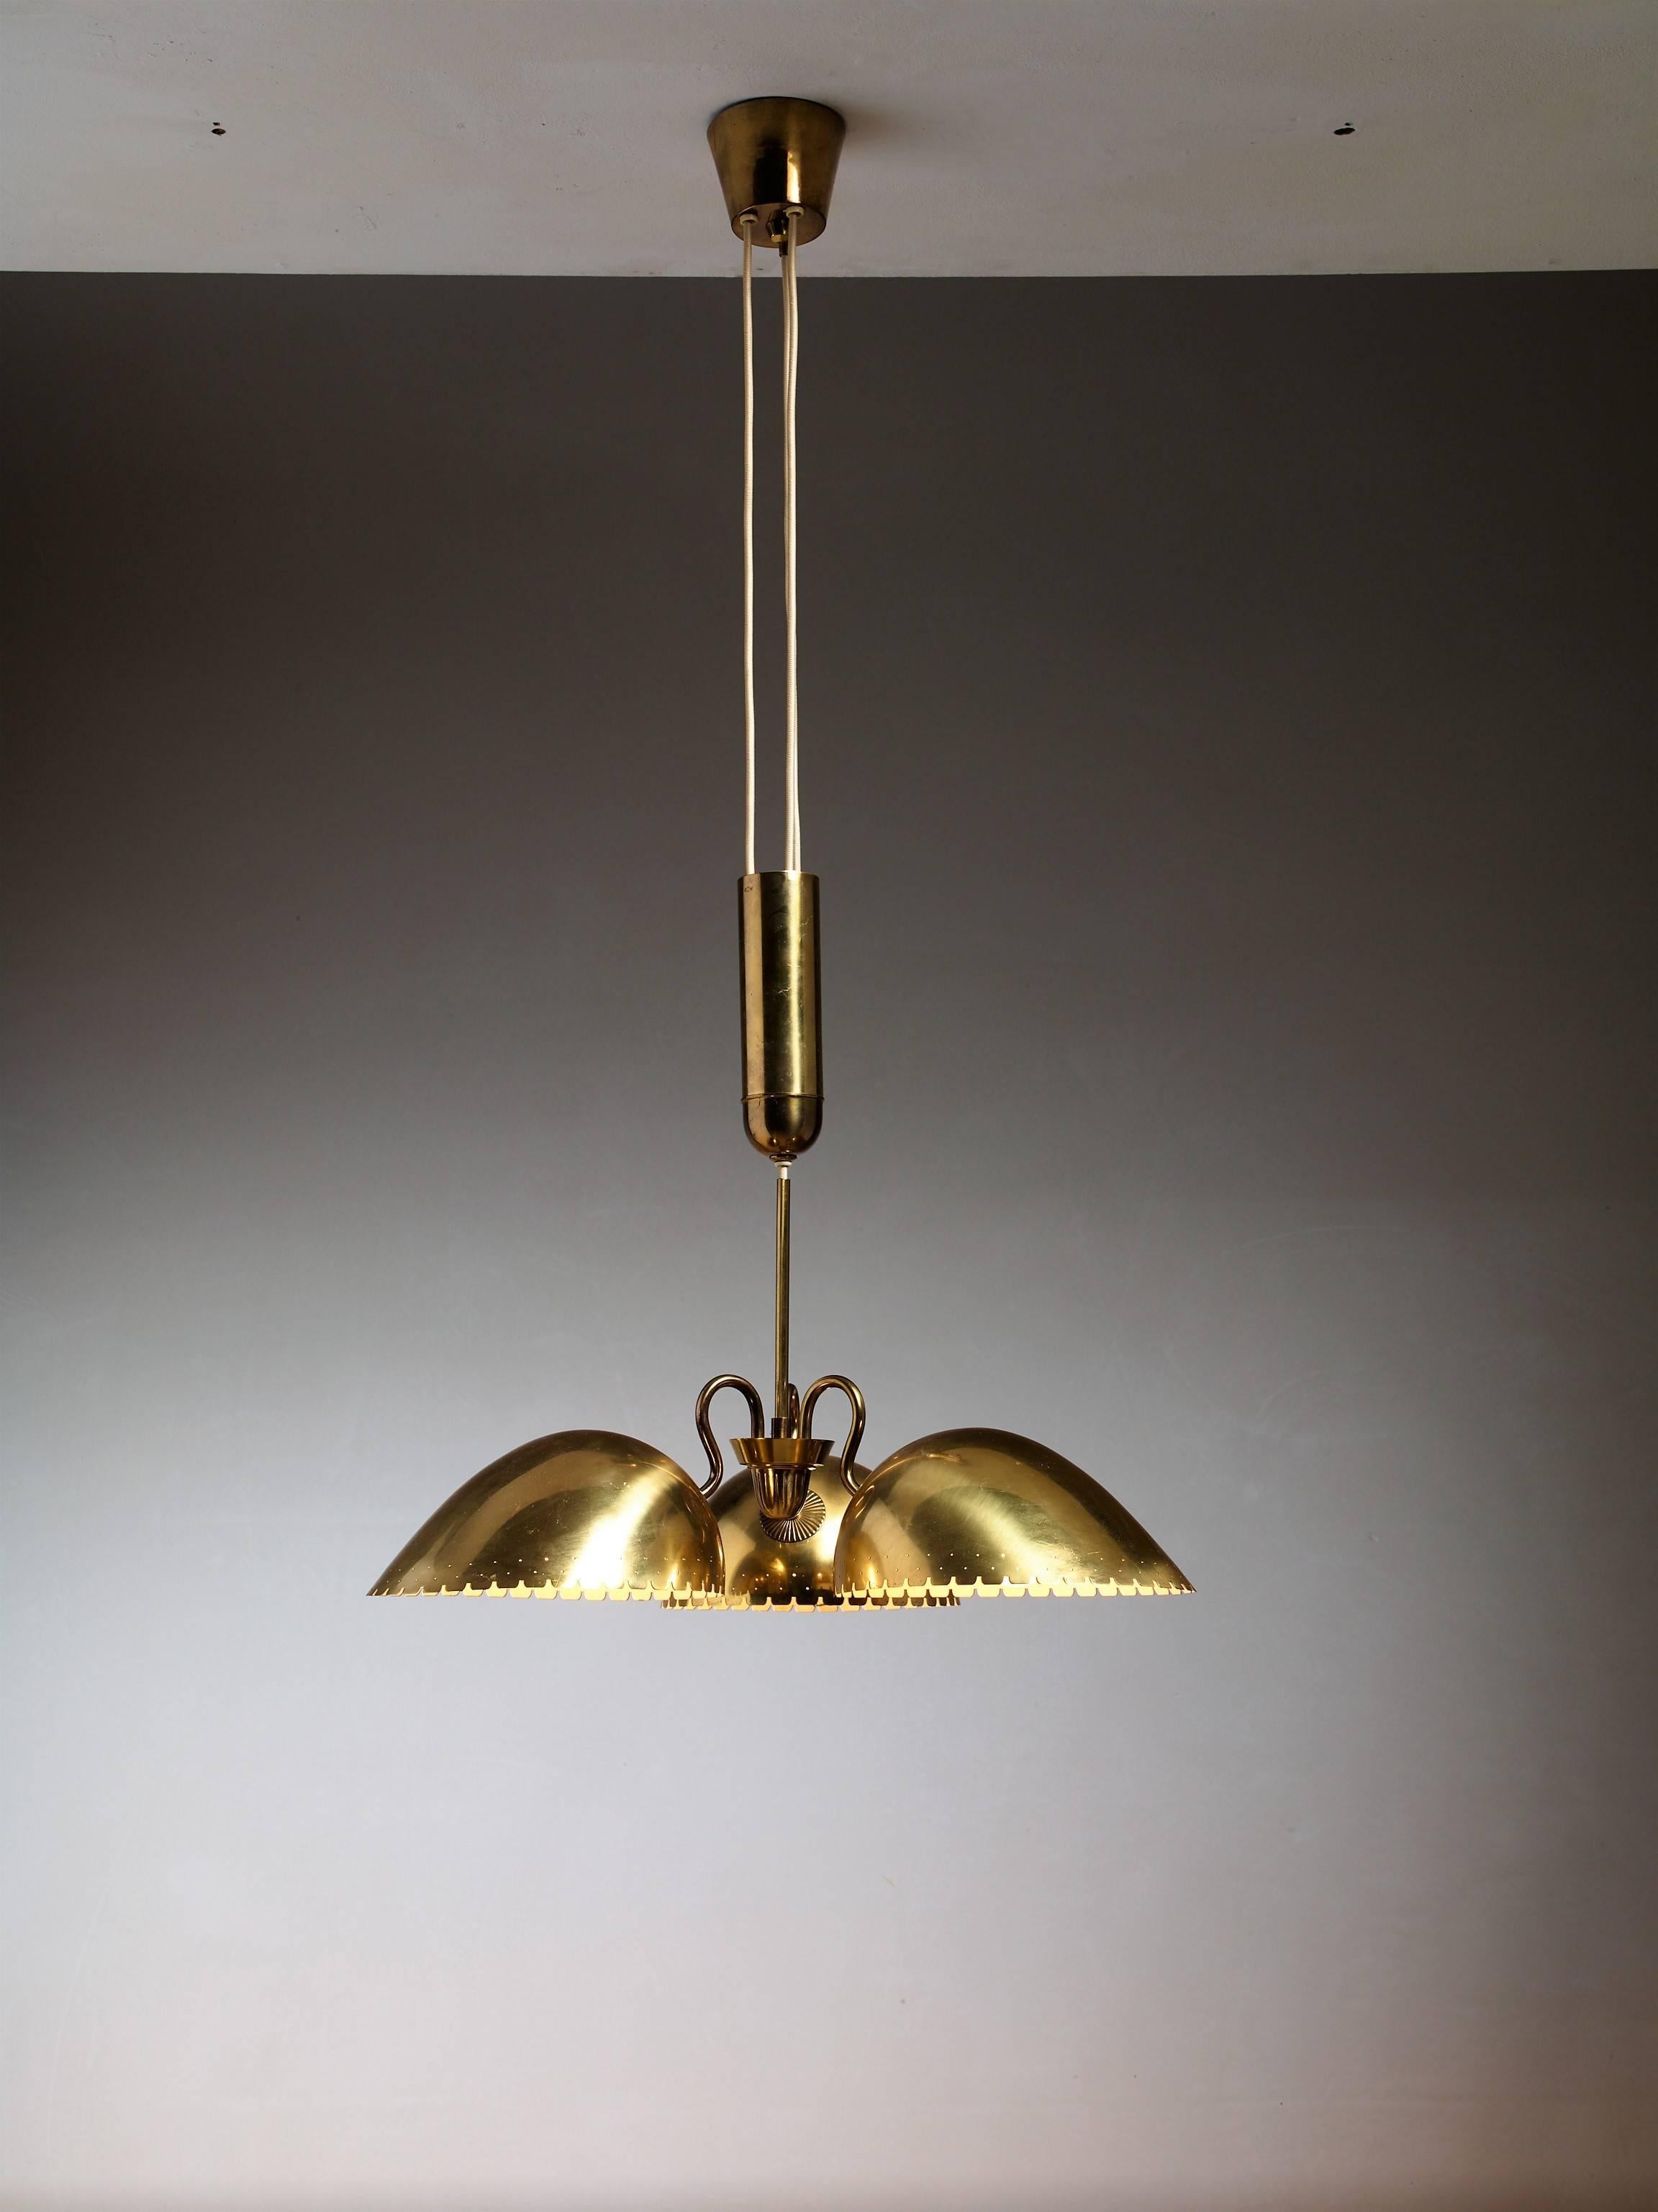 A wonderful brass pendant with a counterweight in the center from Sweden by Bertil Brisborg for Bohlmarks. The lamp has three shades with serrated and perforated edges, facing downwards.

The height mentioned is the height of the shade itself,